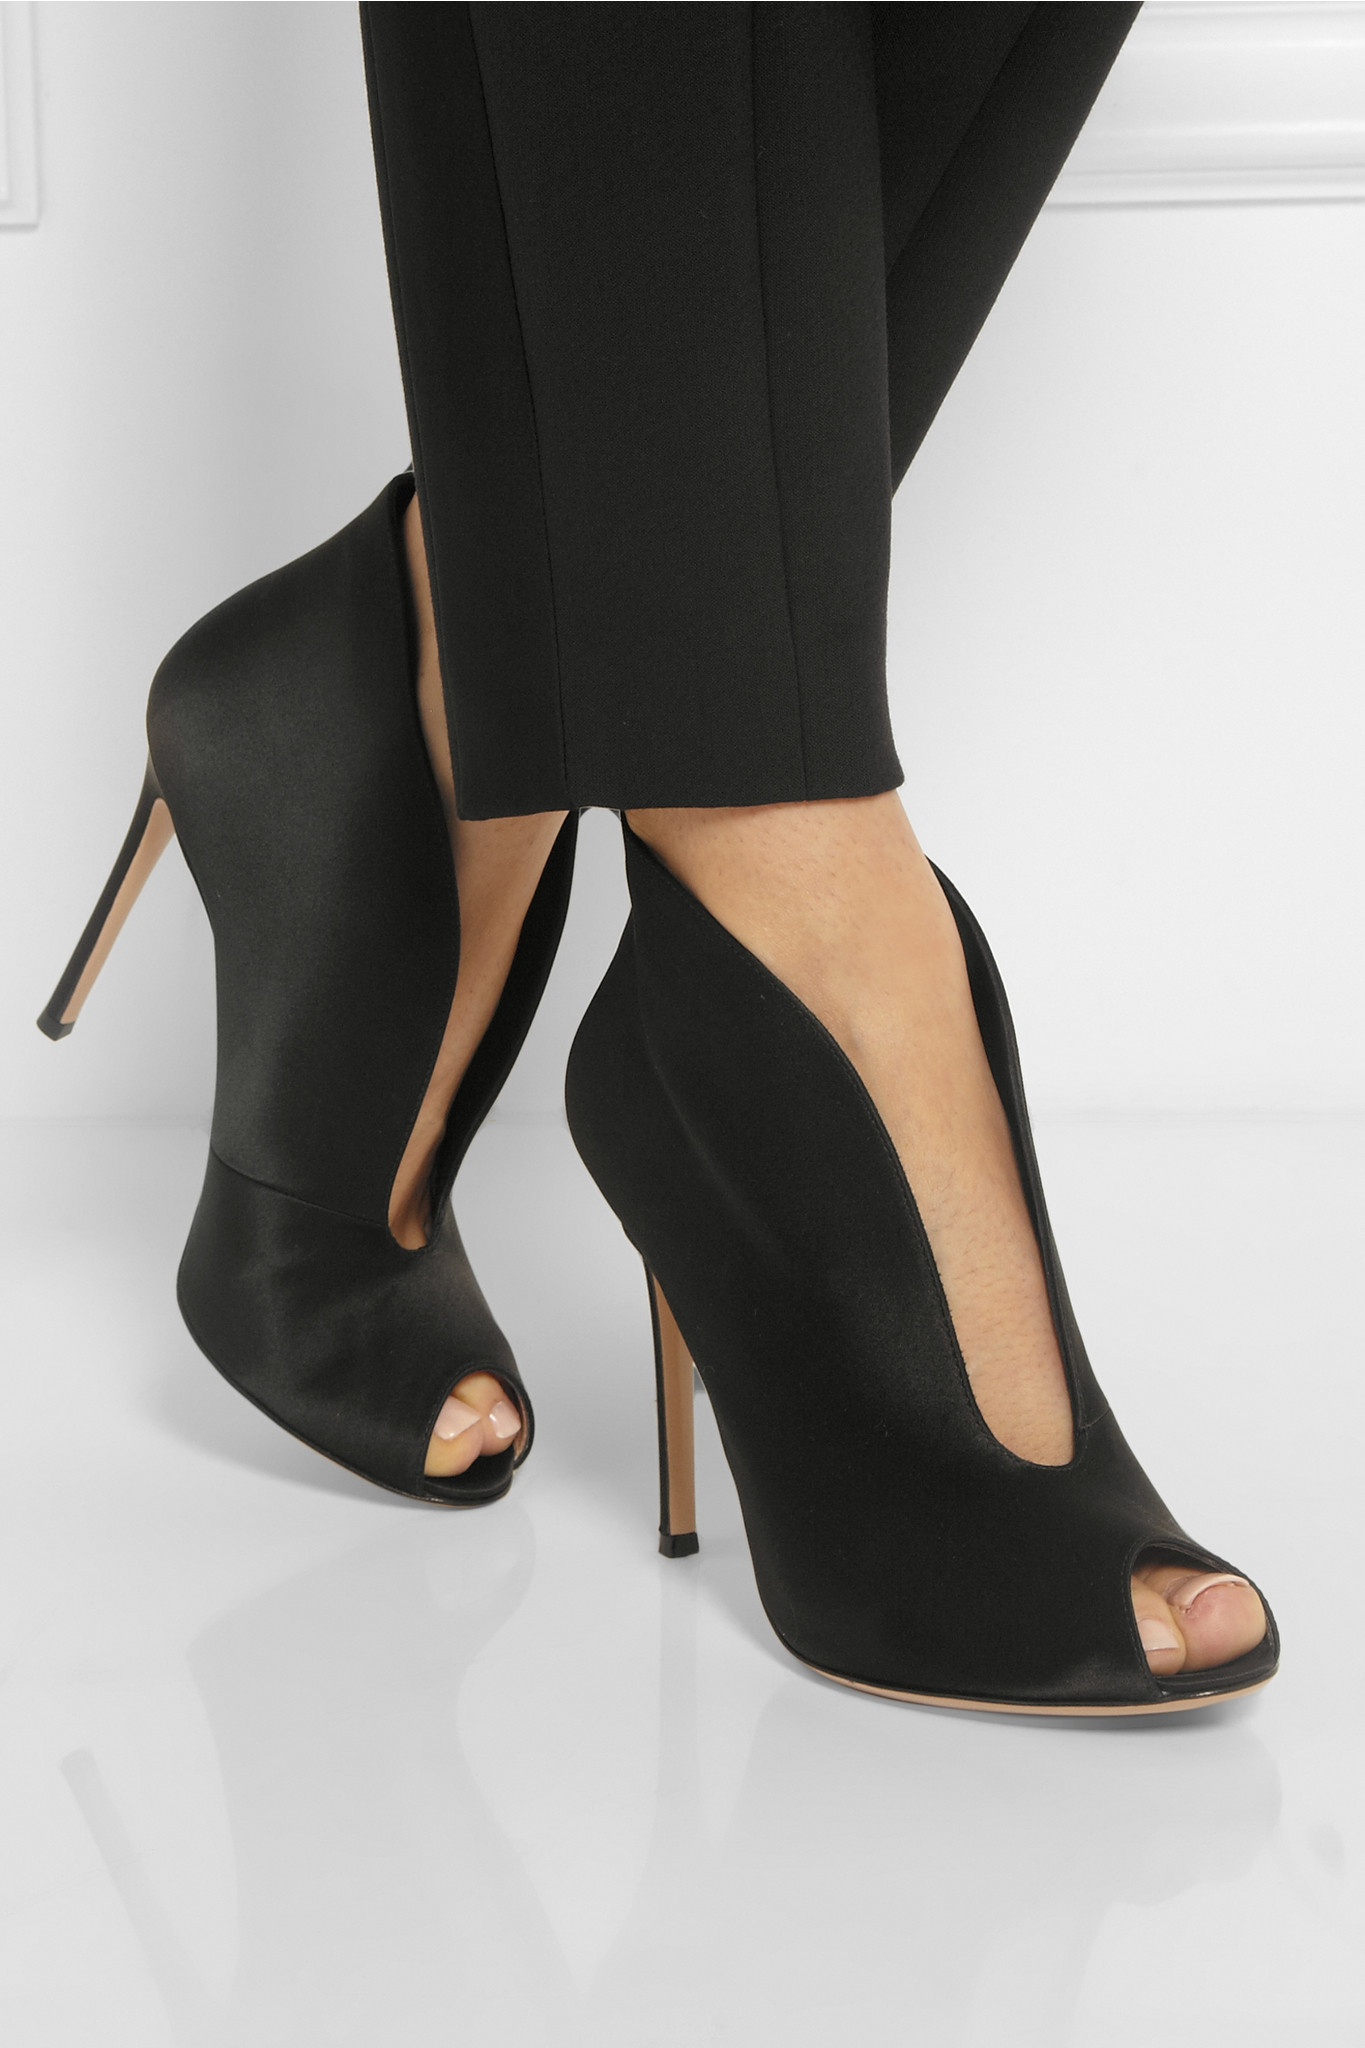 Gianvito rossi Vamp 100 Satin Ankle Boots in Black | Lyst